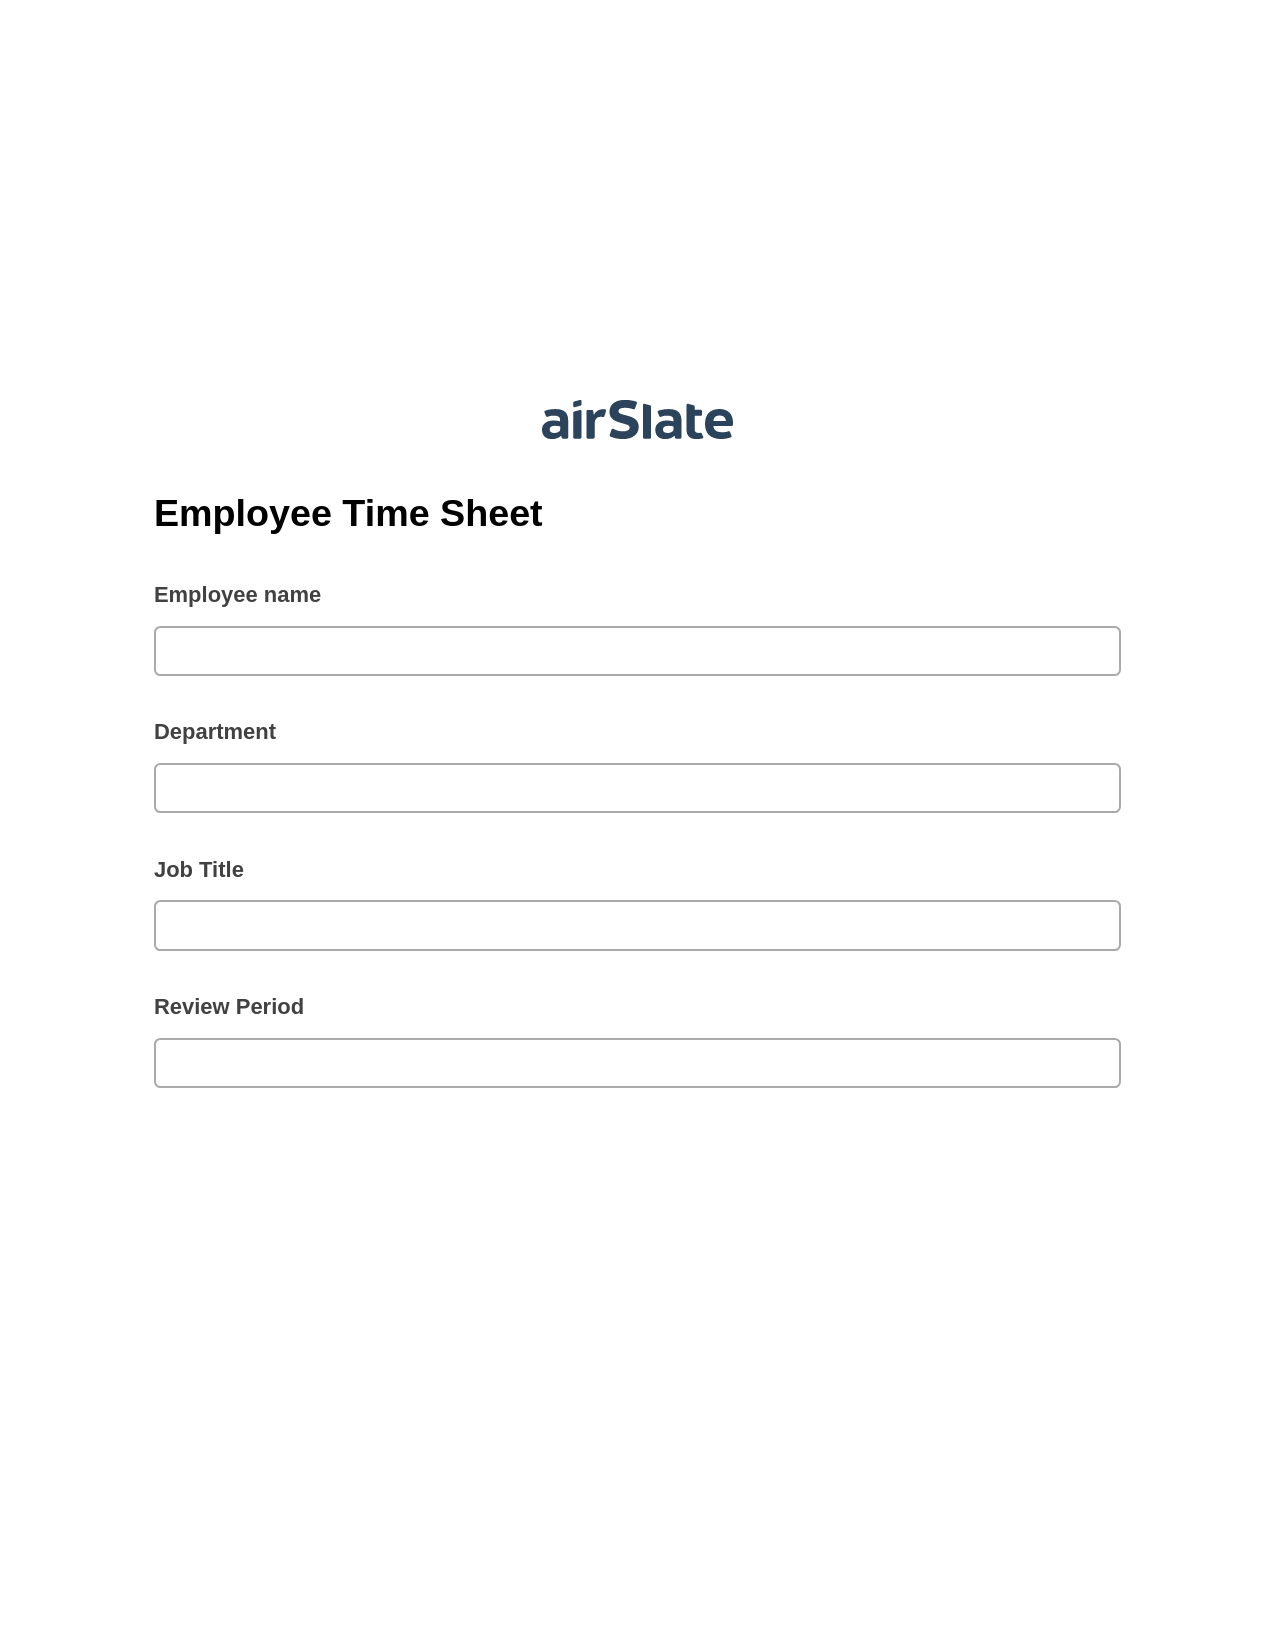 Multirole Employee Time Sheet Pre-fill from another Slate Bot, Update Audit Trail Bot, Export to WebMerge Bot